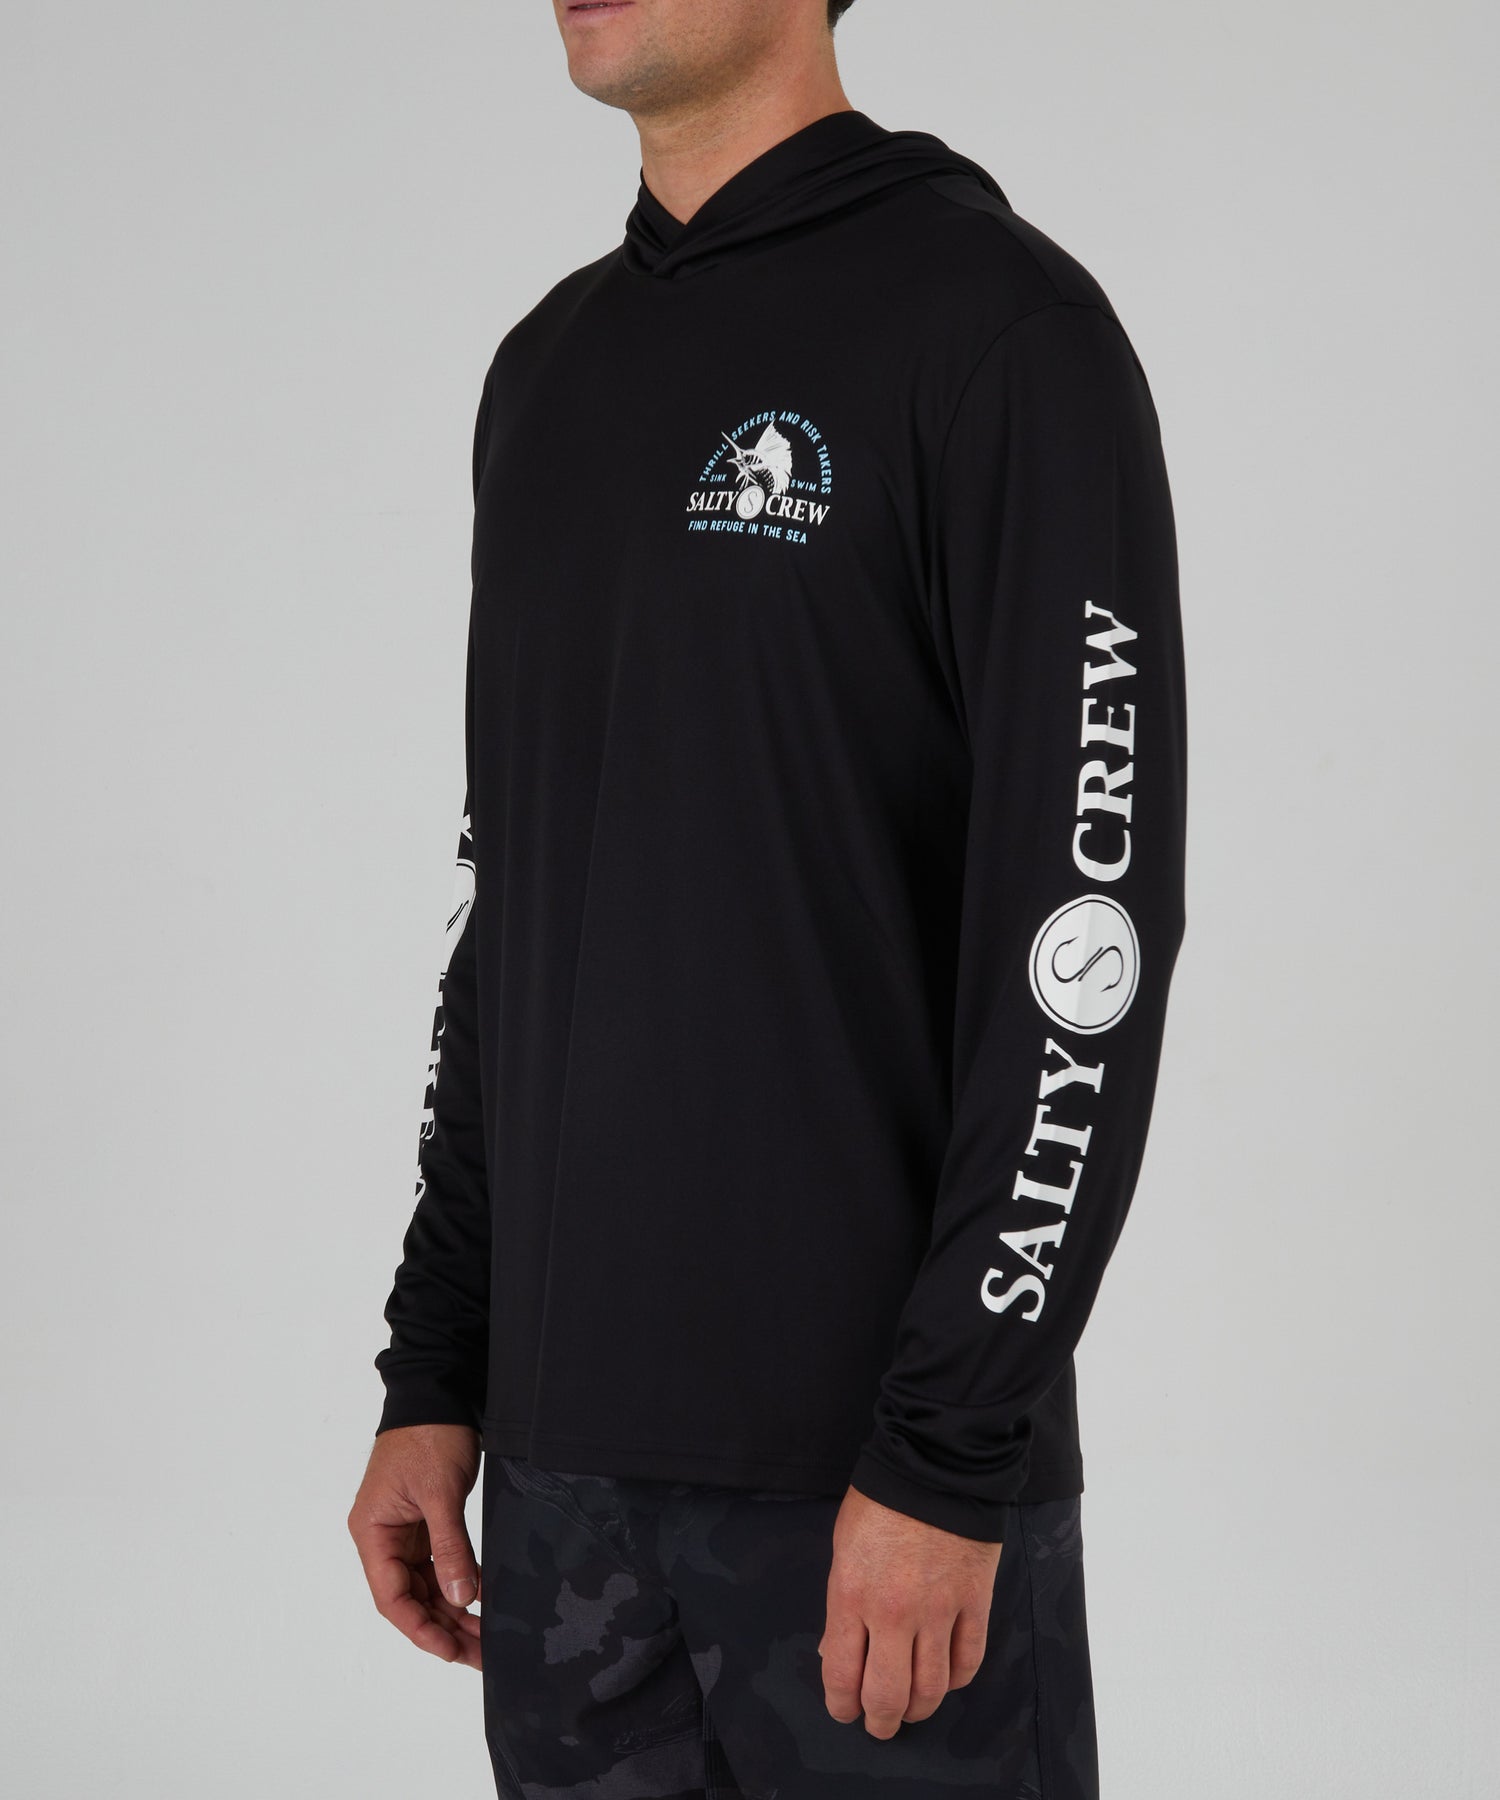 front angled view of Yacht Club Black Hood Sunshirt